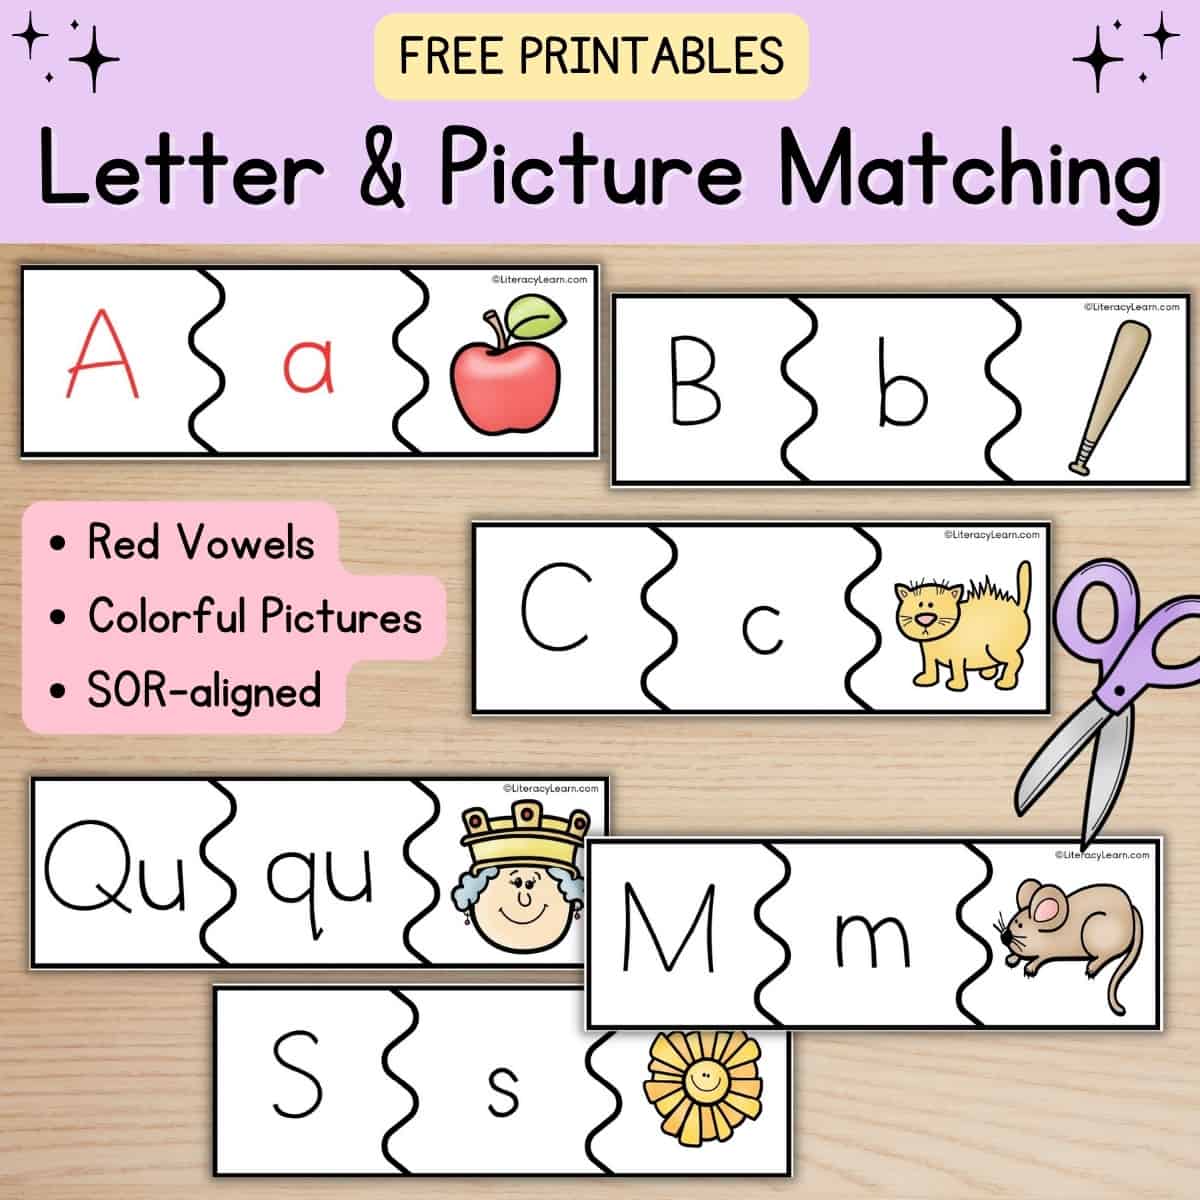 Phonics Pack - Letter Mm - Flashcards, Worksheet, and Games